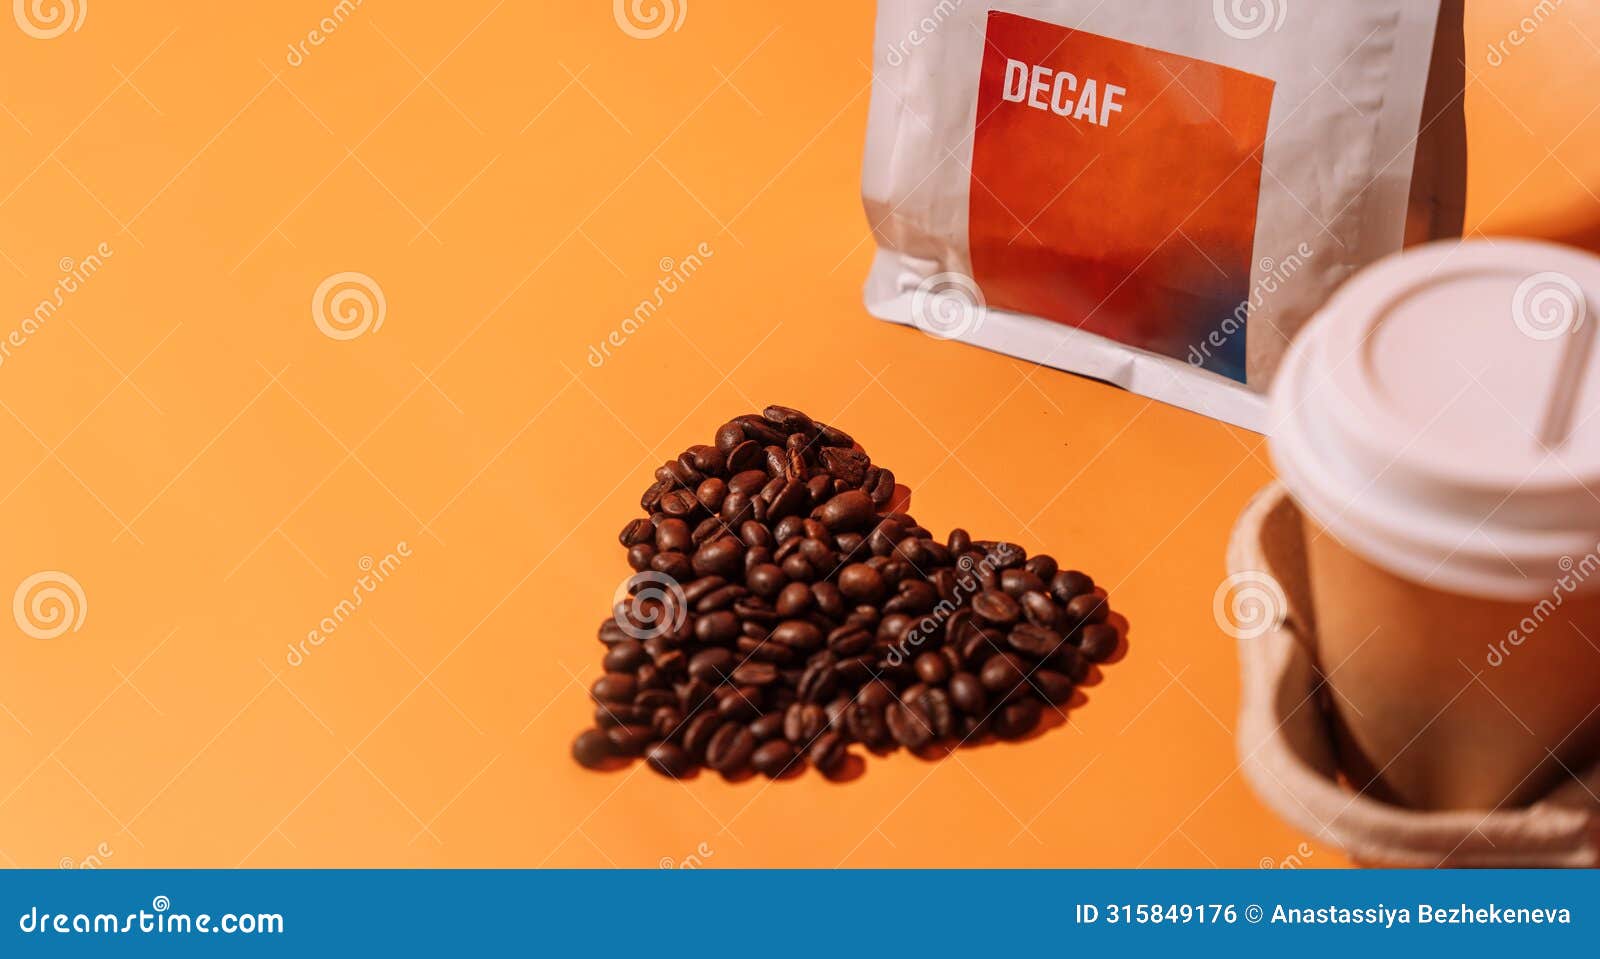 coffee beans in the  of a heart on an orange background next to packaging with text decaf and a paper cup in a tray